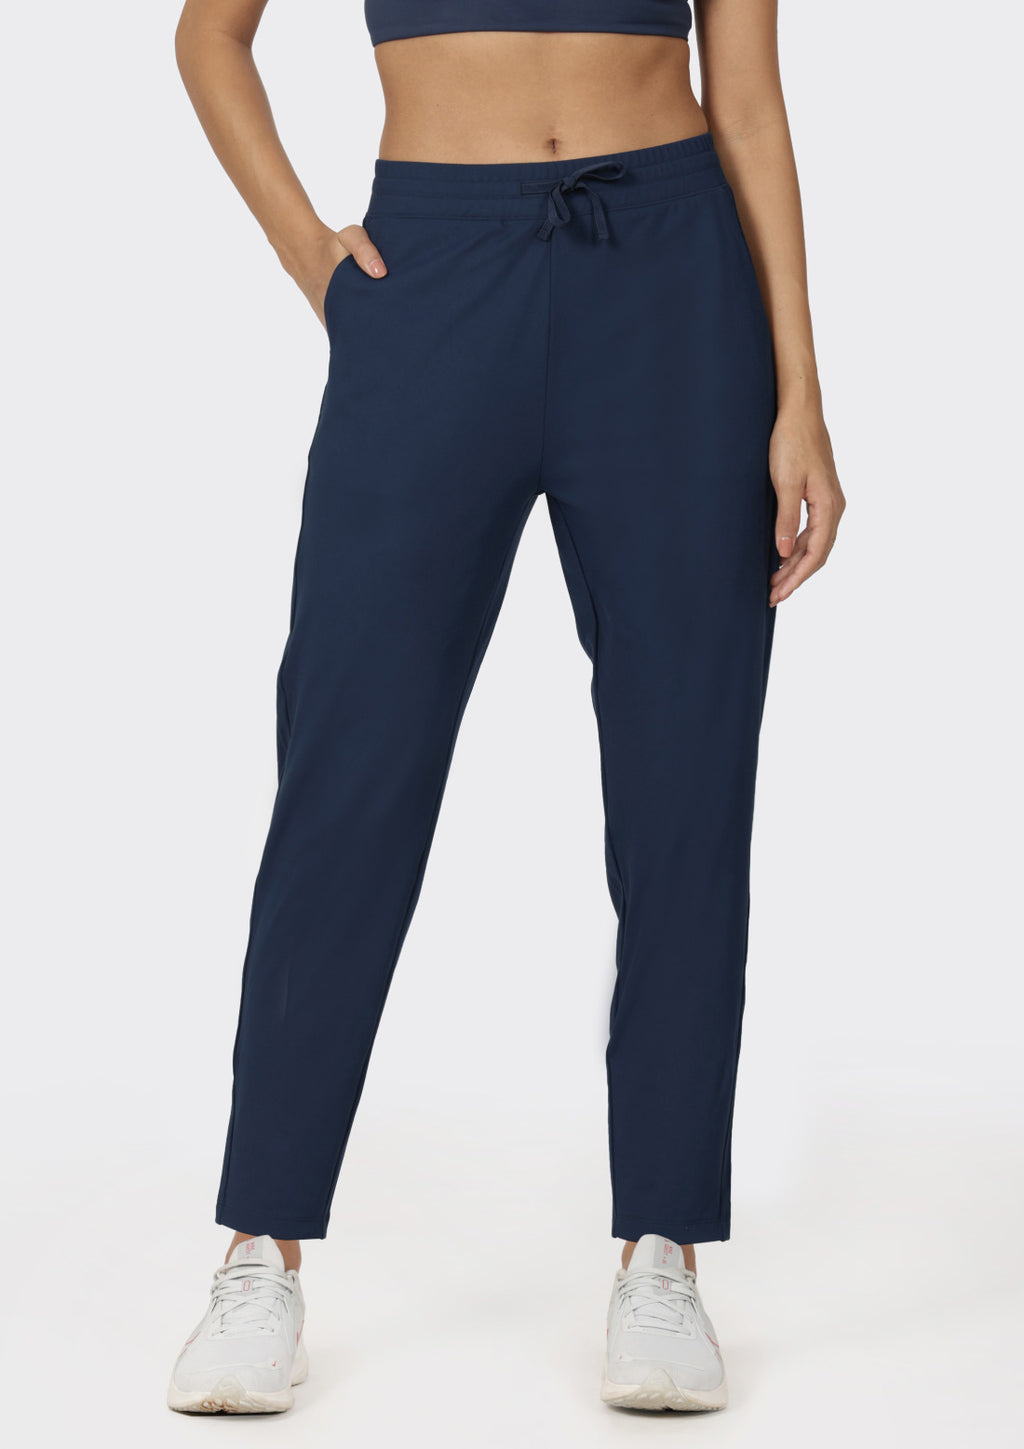 Buy Tapered Pants for Women Online from Blissclub